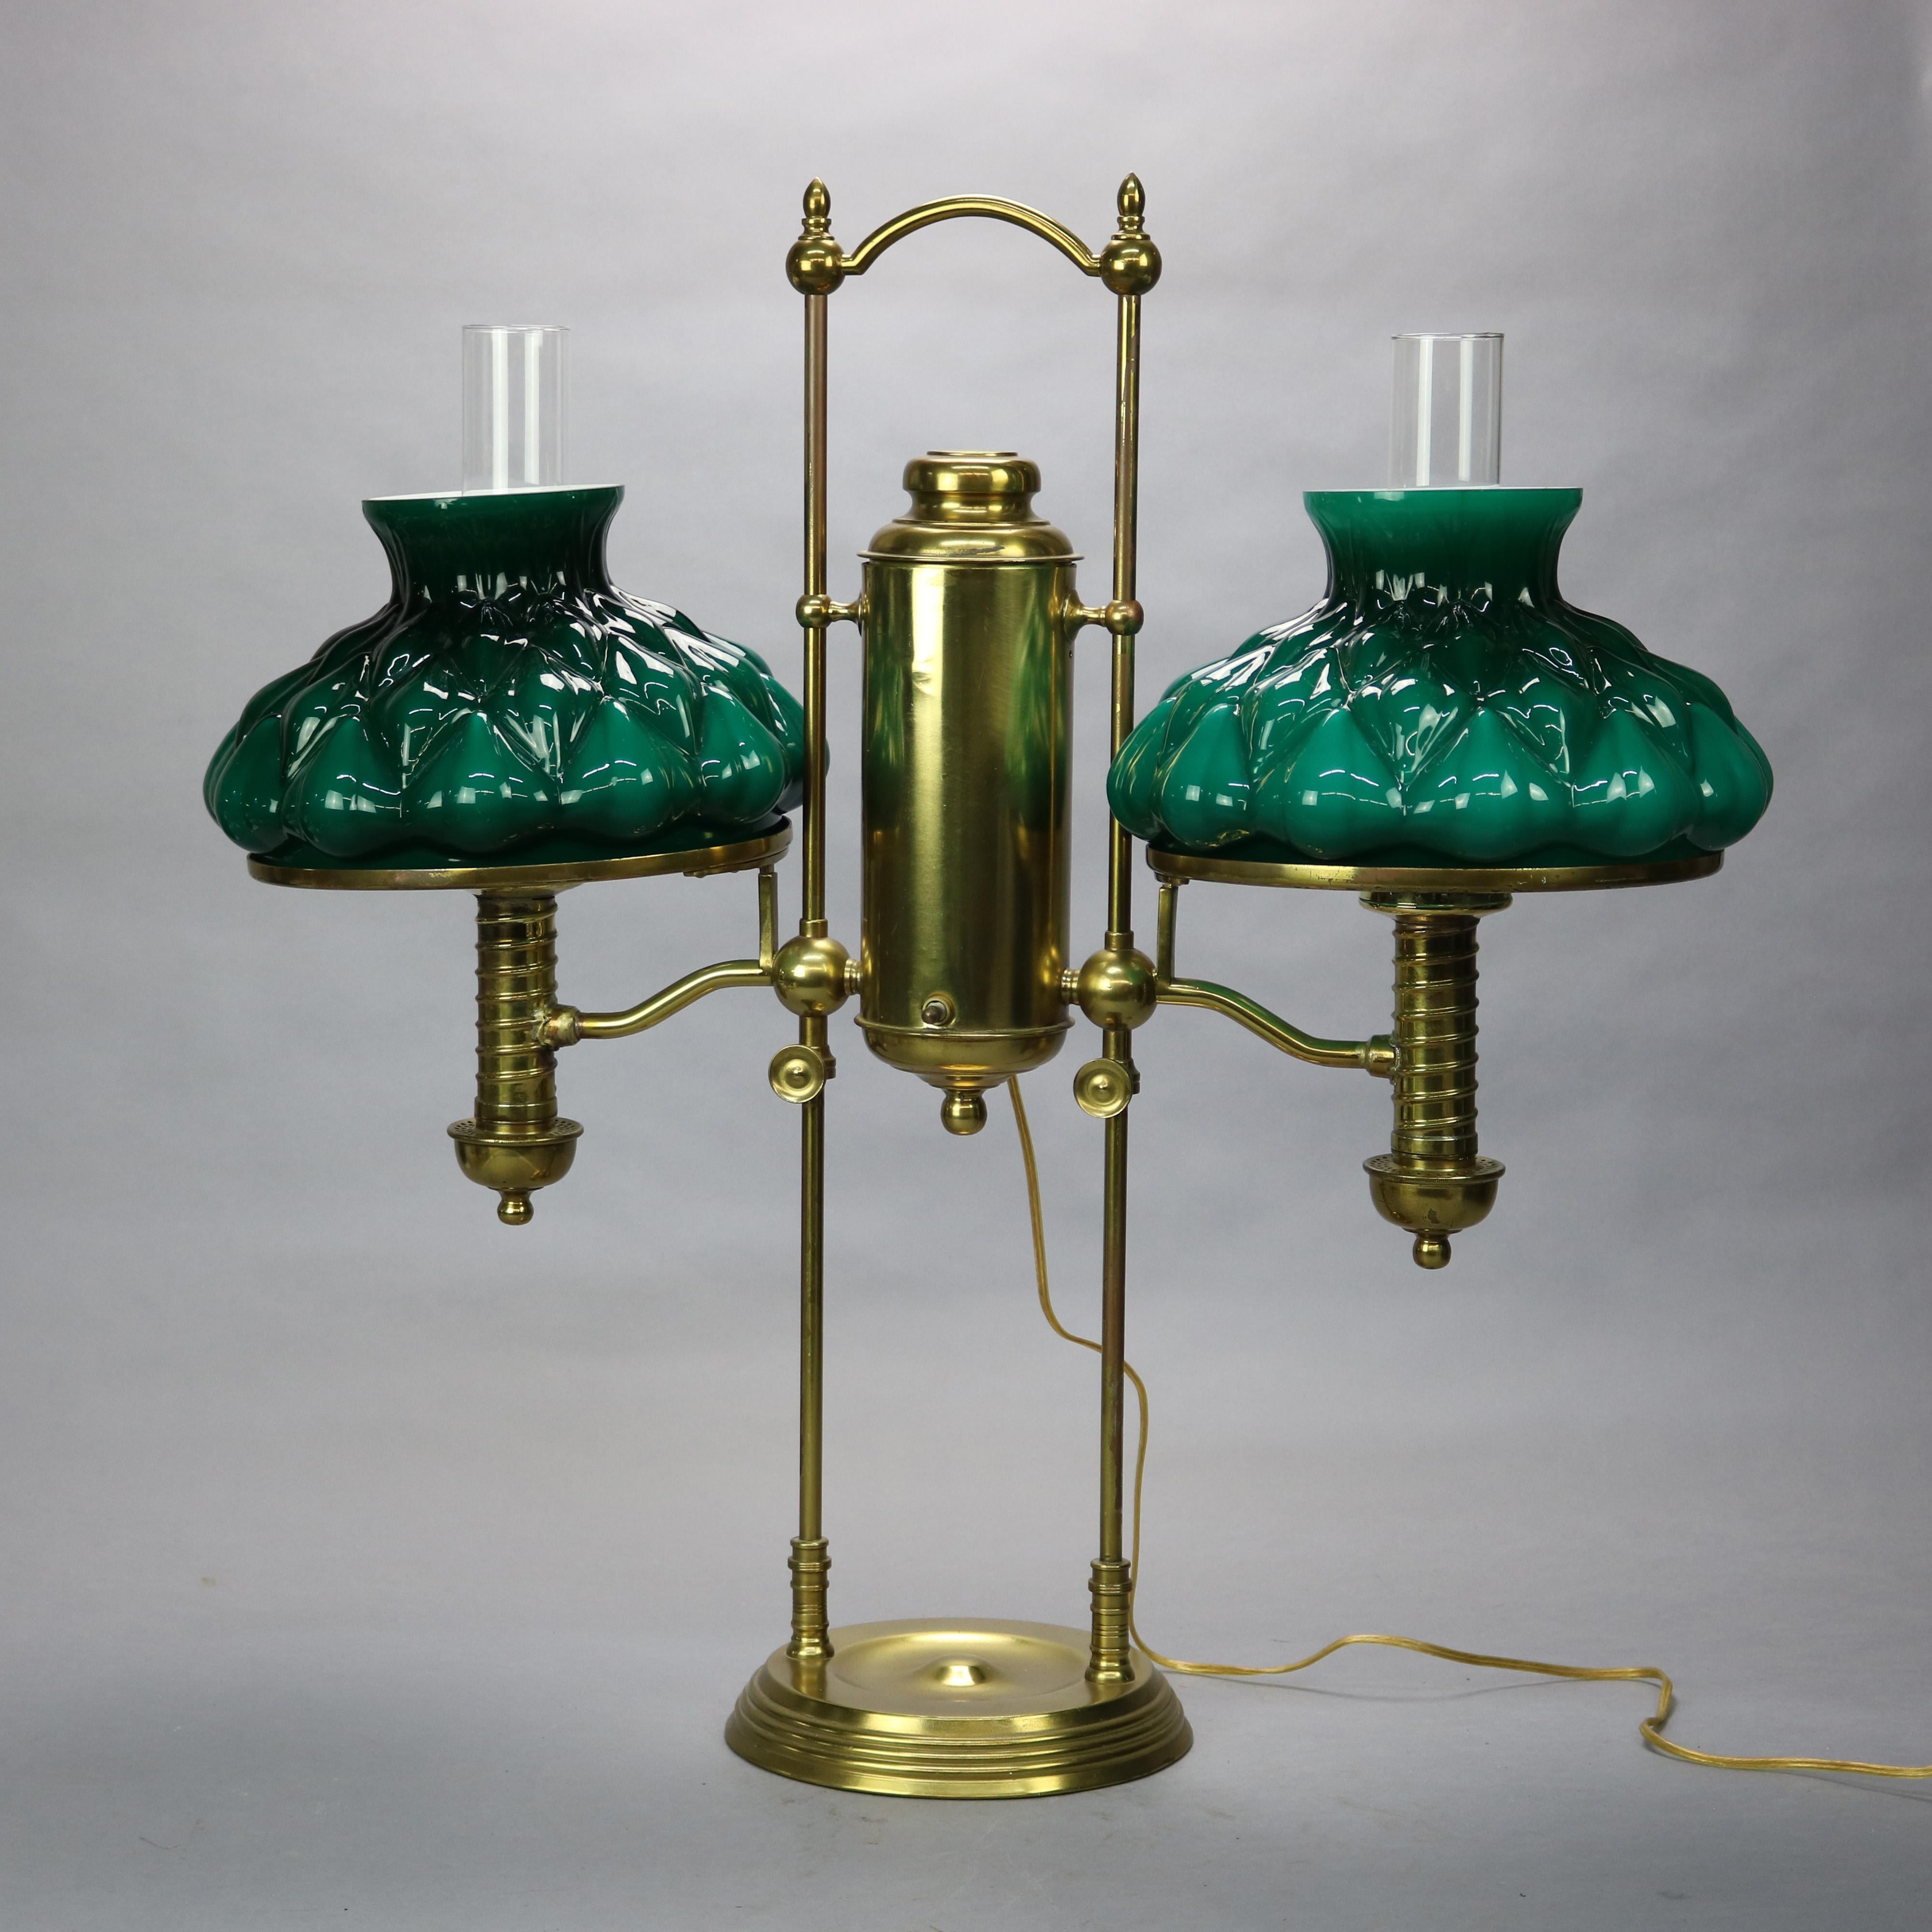 An antique Harvard school student lamp offers brass construction with central font having flanking adjustable lights with newer molded emerald cased glass shades, c1890

Measures: 28.75